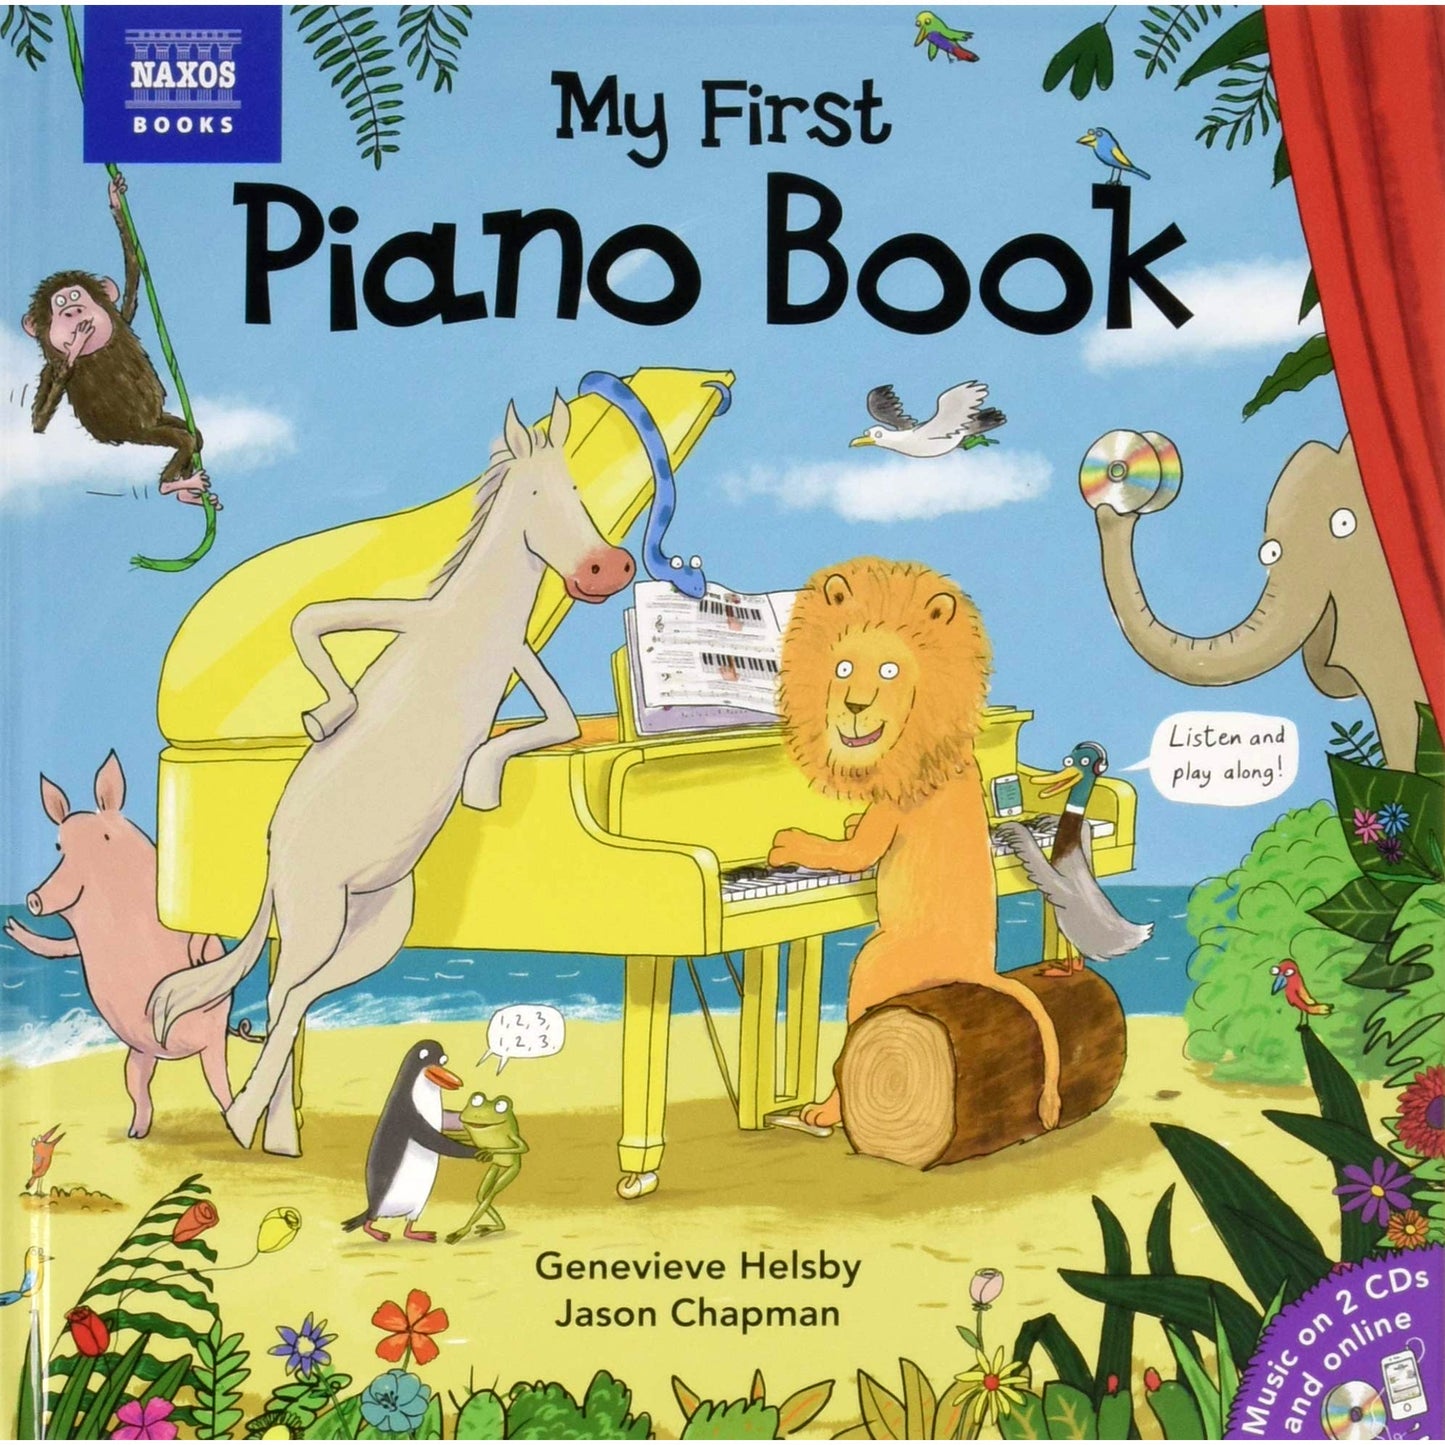 My First Piano Book, Helsby